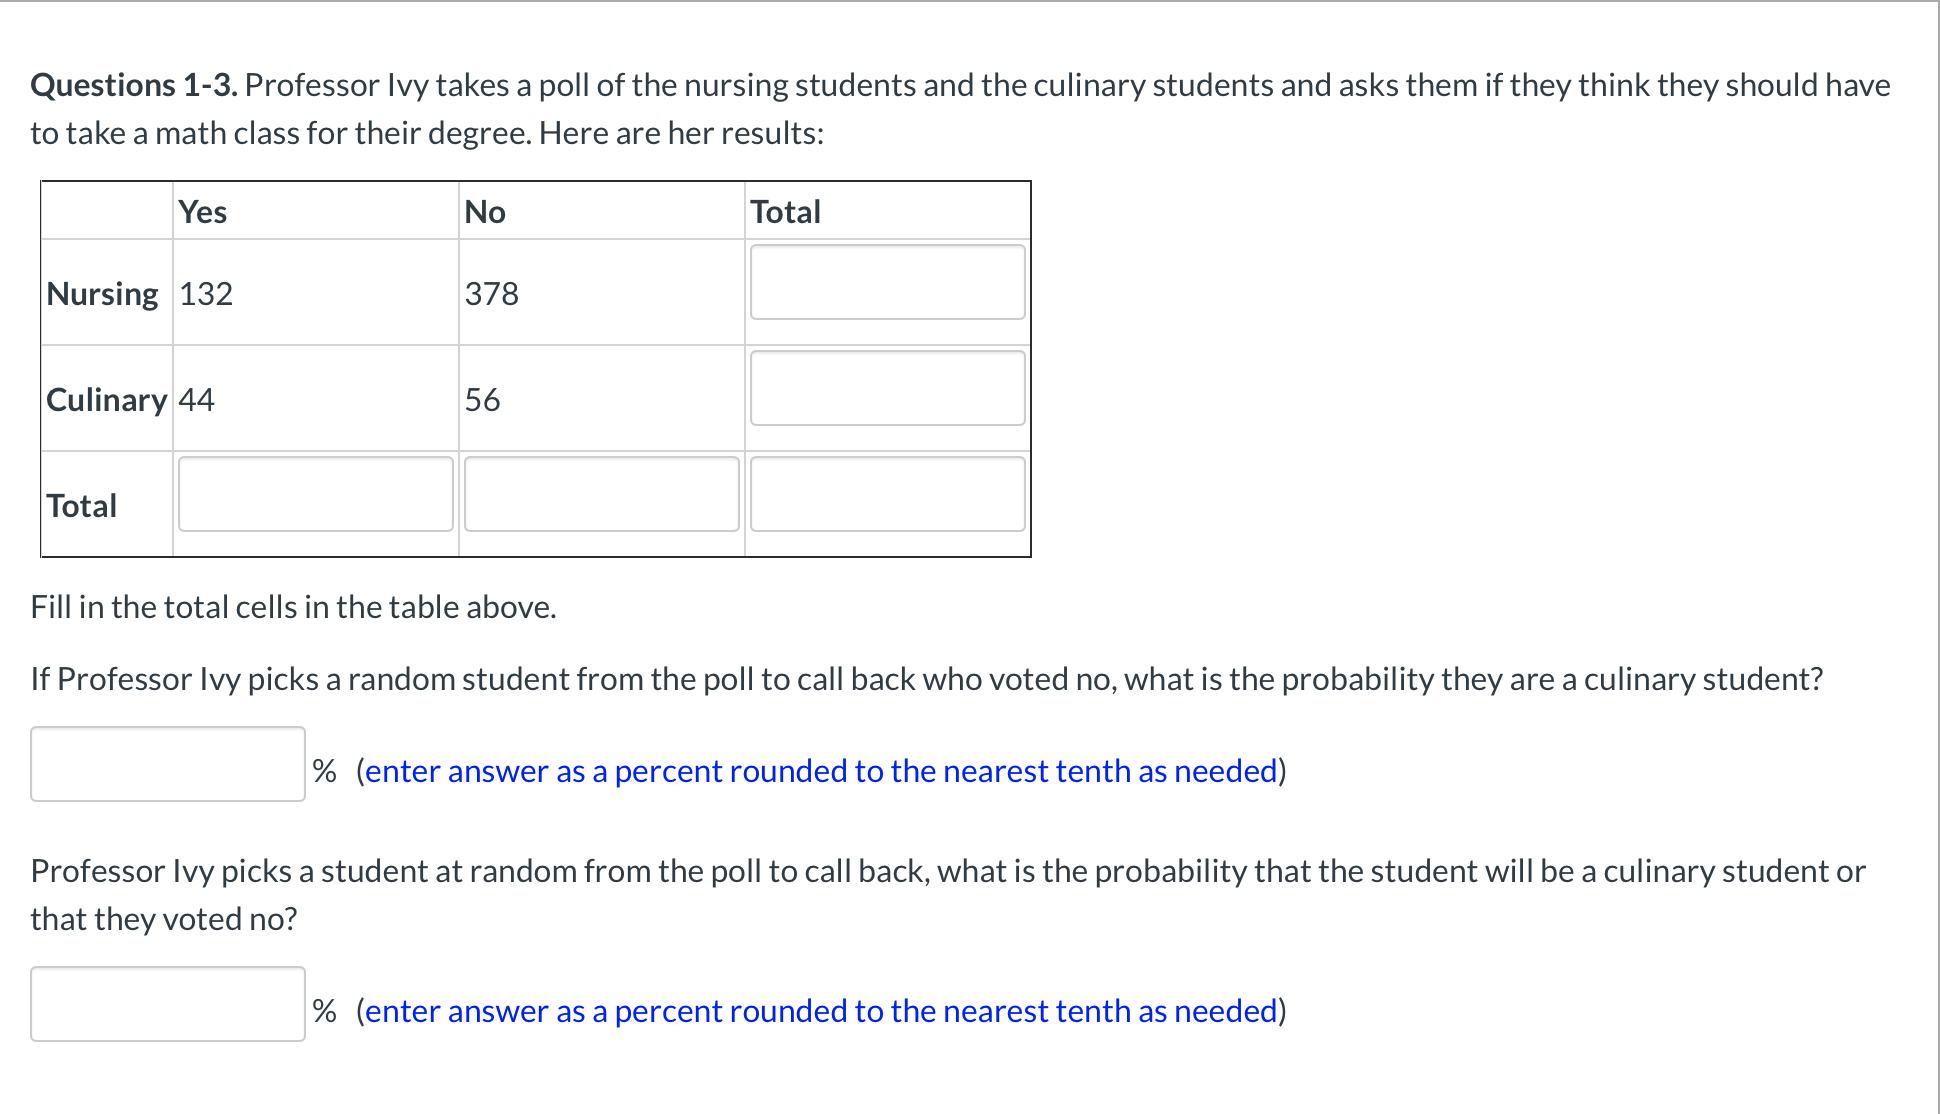 Questions 1-3. Professor Ivy takes a poll of the nursing students and the culinary students and asks them if they think they should have
to take a math class for their degree. Here are her results:
Yes
No
Total
Nursing 132
378
Culinary 44
56
Total
Fill in the total cells in the table above.
If Professor Ivy picks a random student from the poll to call back who voted no, what is the probability they are a culinary student?
% (enter answer as a percent rounded to the nearest tenth as needed)
Professor Ivy picks a student at random from the poll to call back, what is the probability that the student wilIl be a culinary student or
that they voted no?
% (enter answer as a percent rounded to the nearest tenth as needed)
